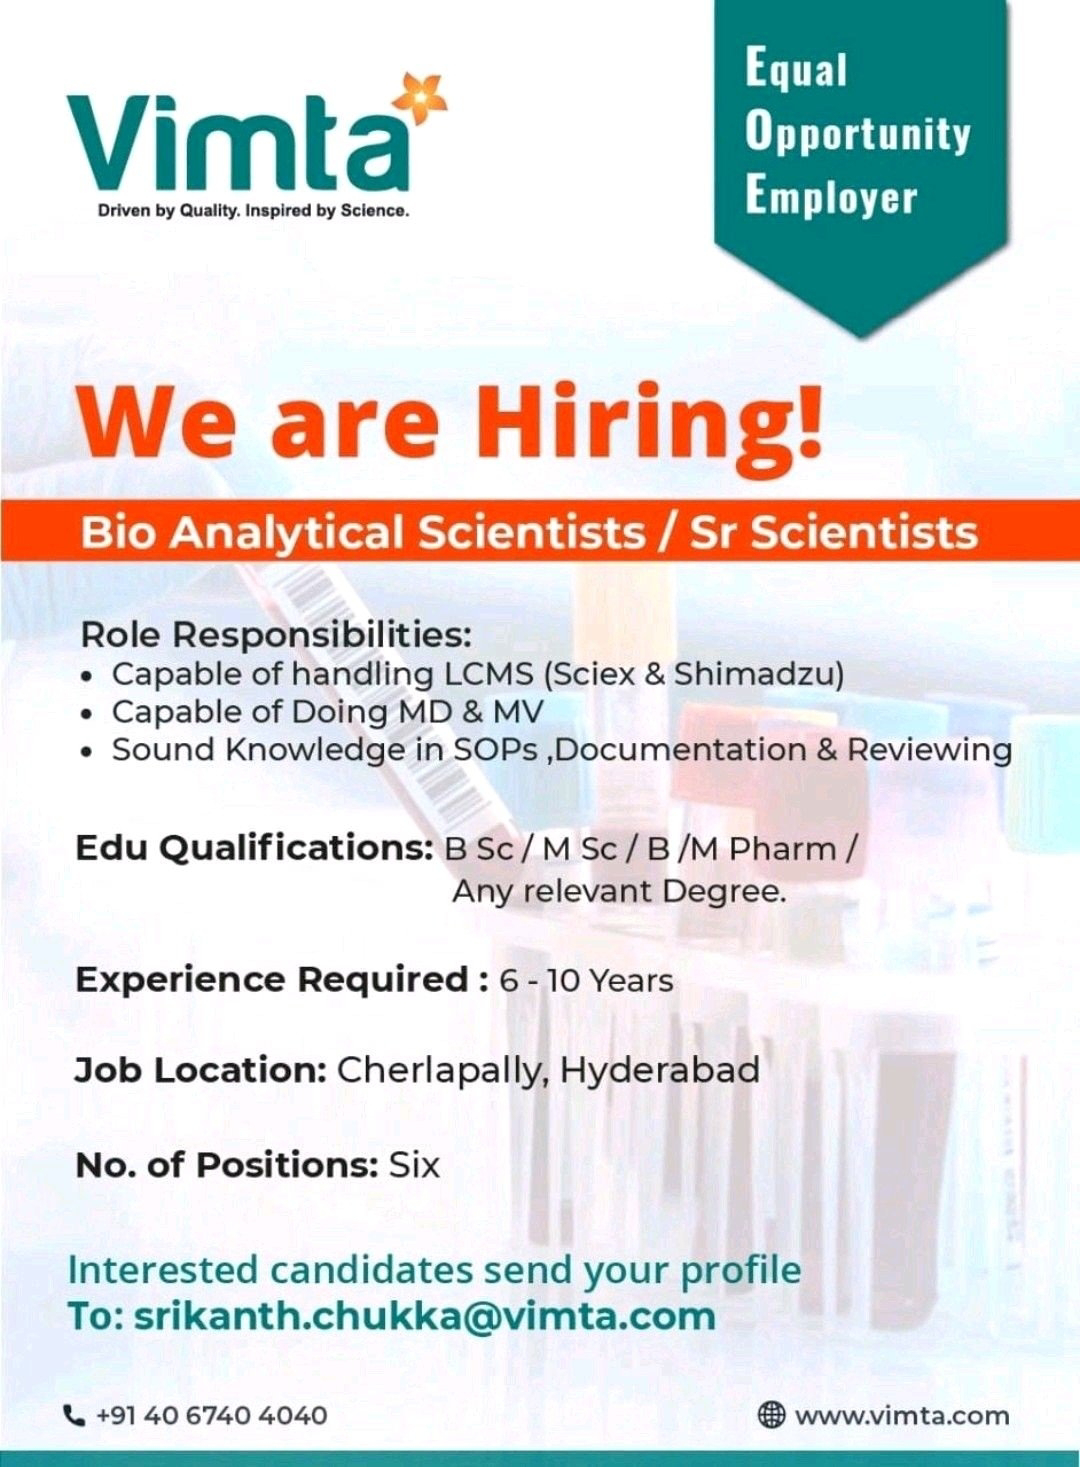 Job Availables, Vimta Job Opening For B.Sc/ M.Sc/ B.Pharm/ M.Pharm Candidates for Scientists/ Sr. Scientists in Bioanalytical department